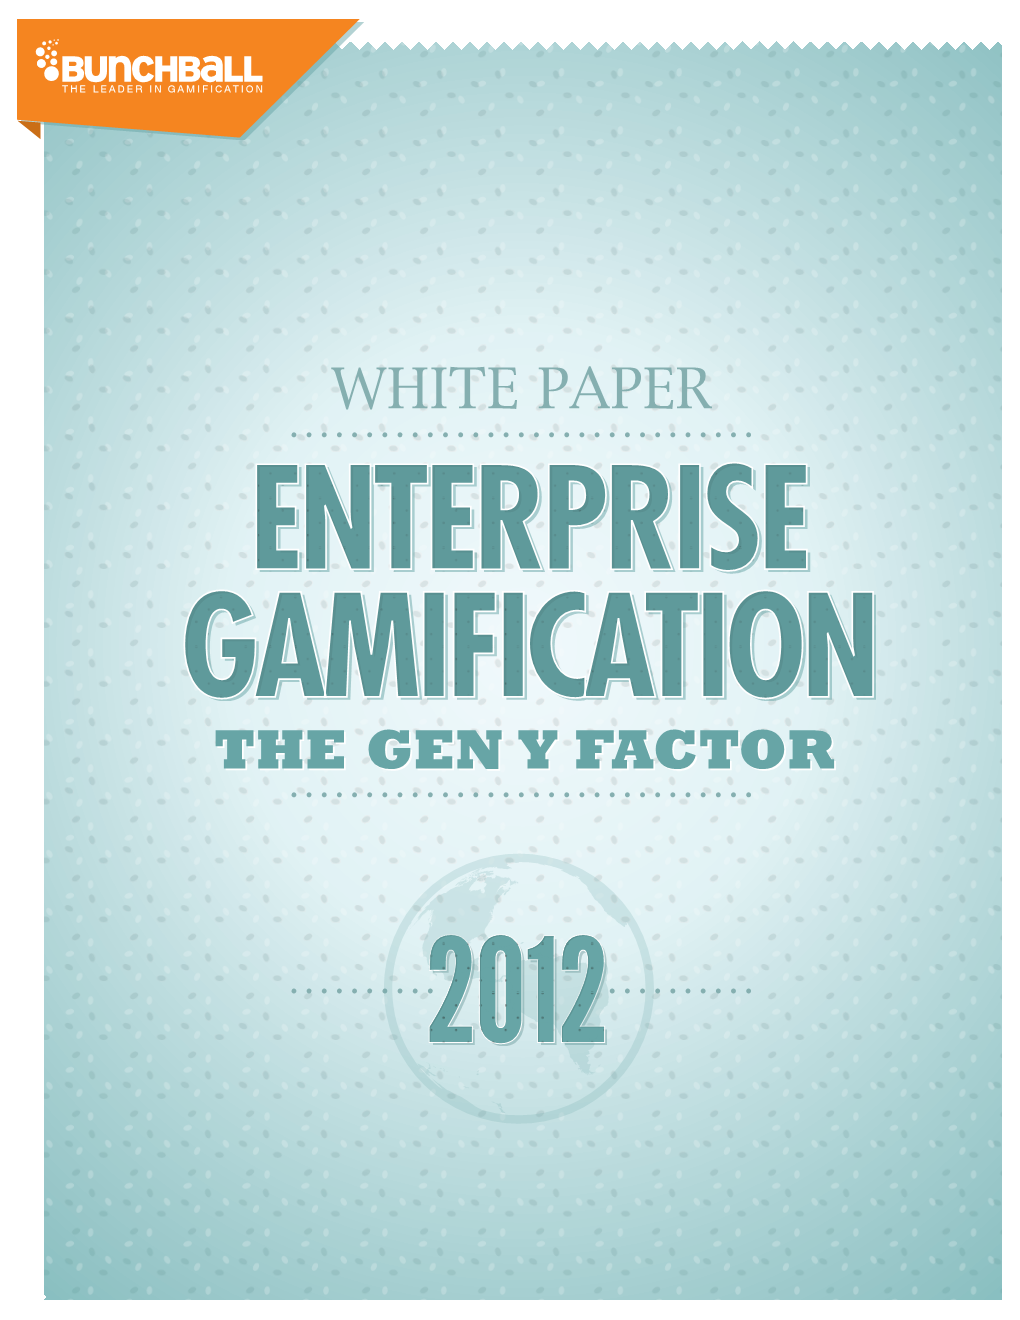 Enterprise Gamification: the Gen Y Factor How Businesses Can Use Gamification to Engage & Motivate Gen Y Employees And, in the Process, Benefit Everyone